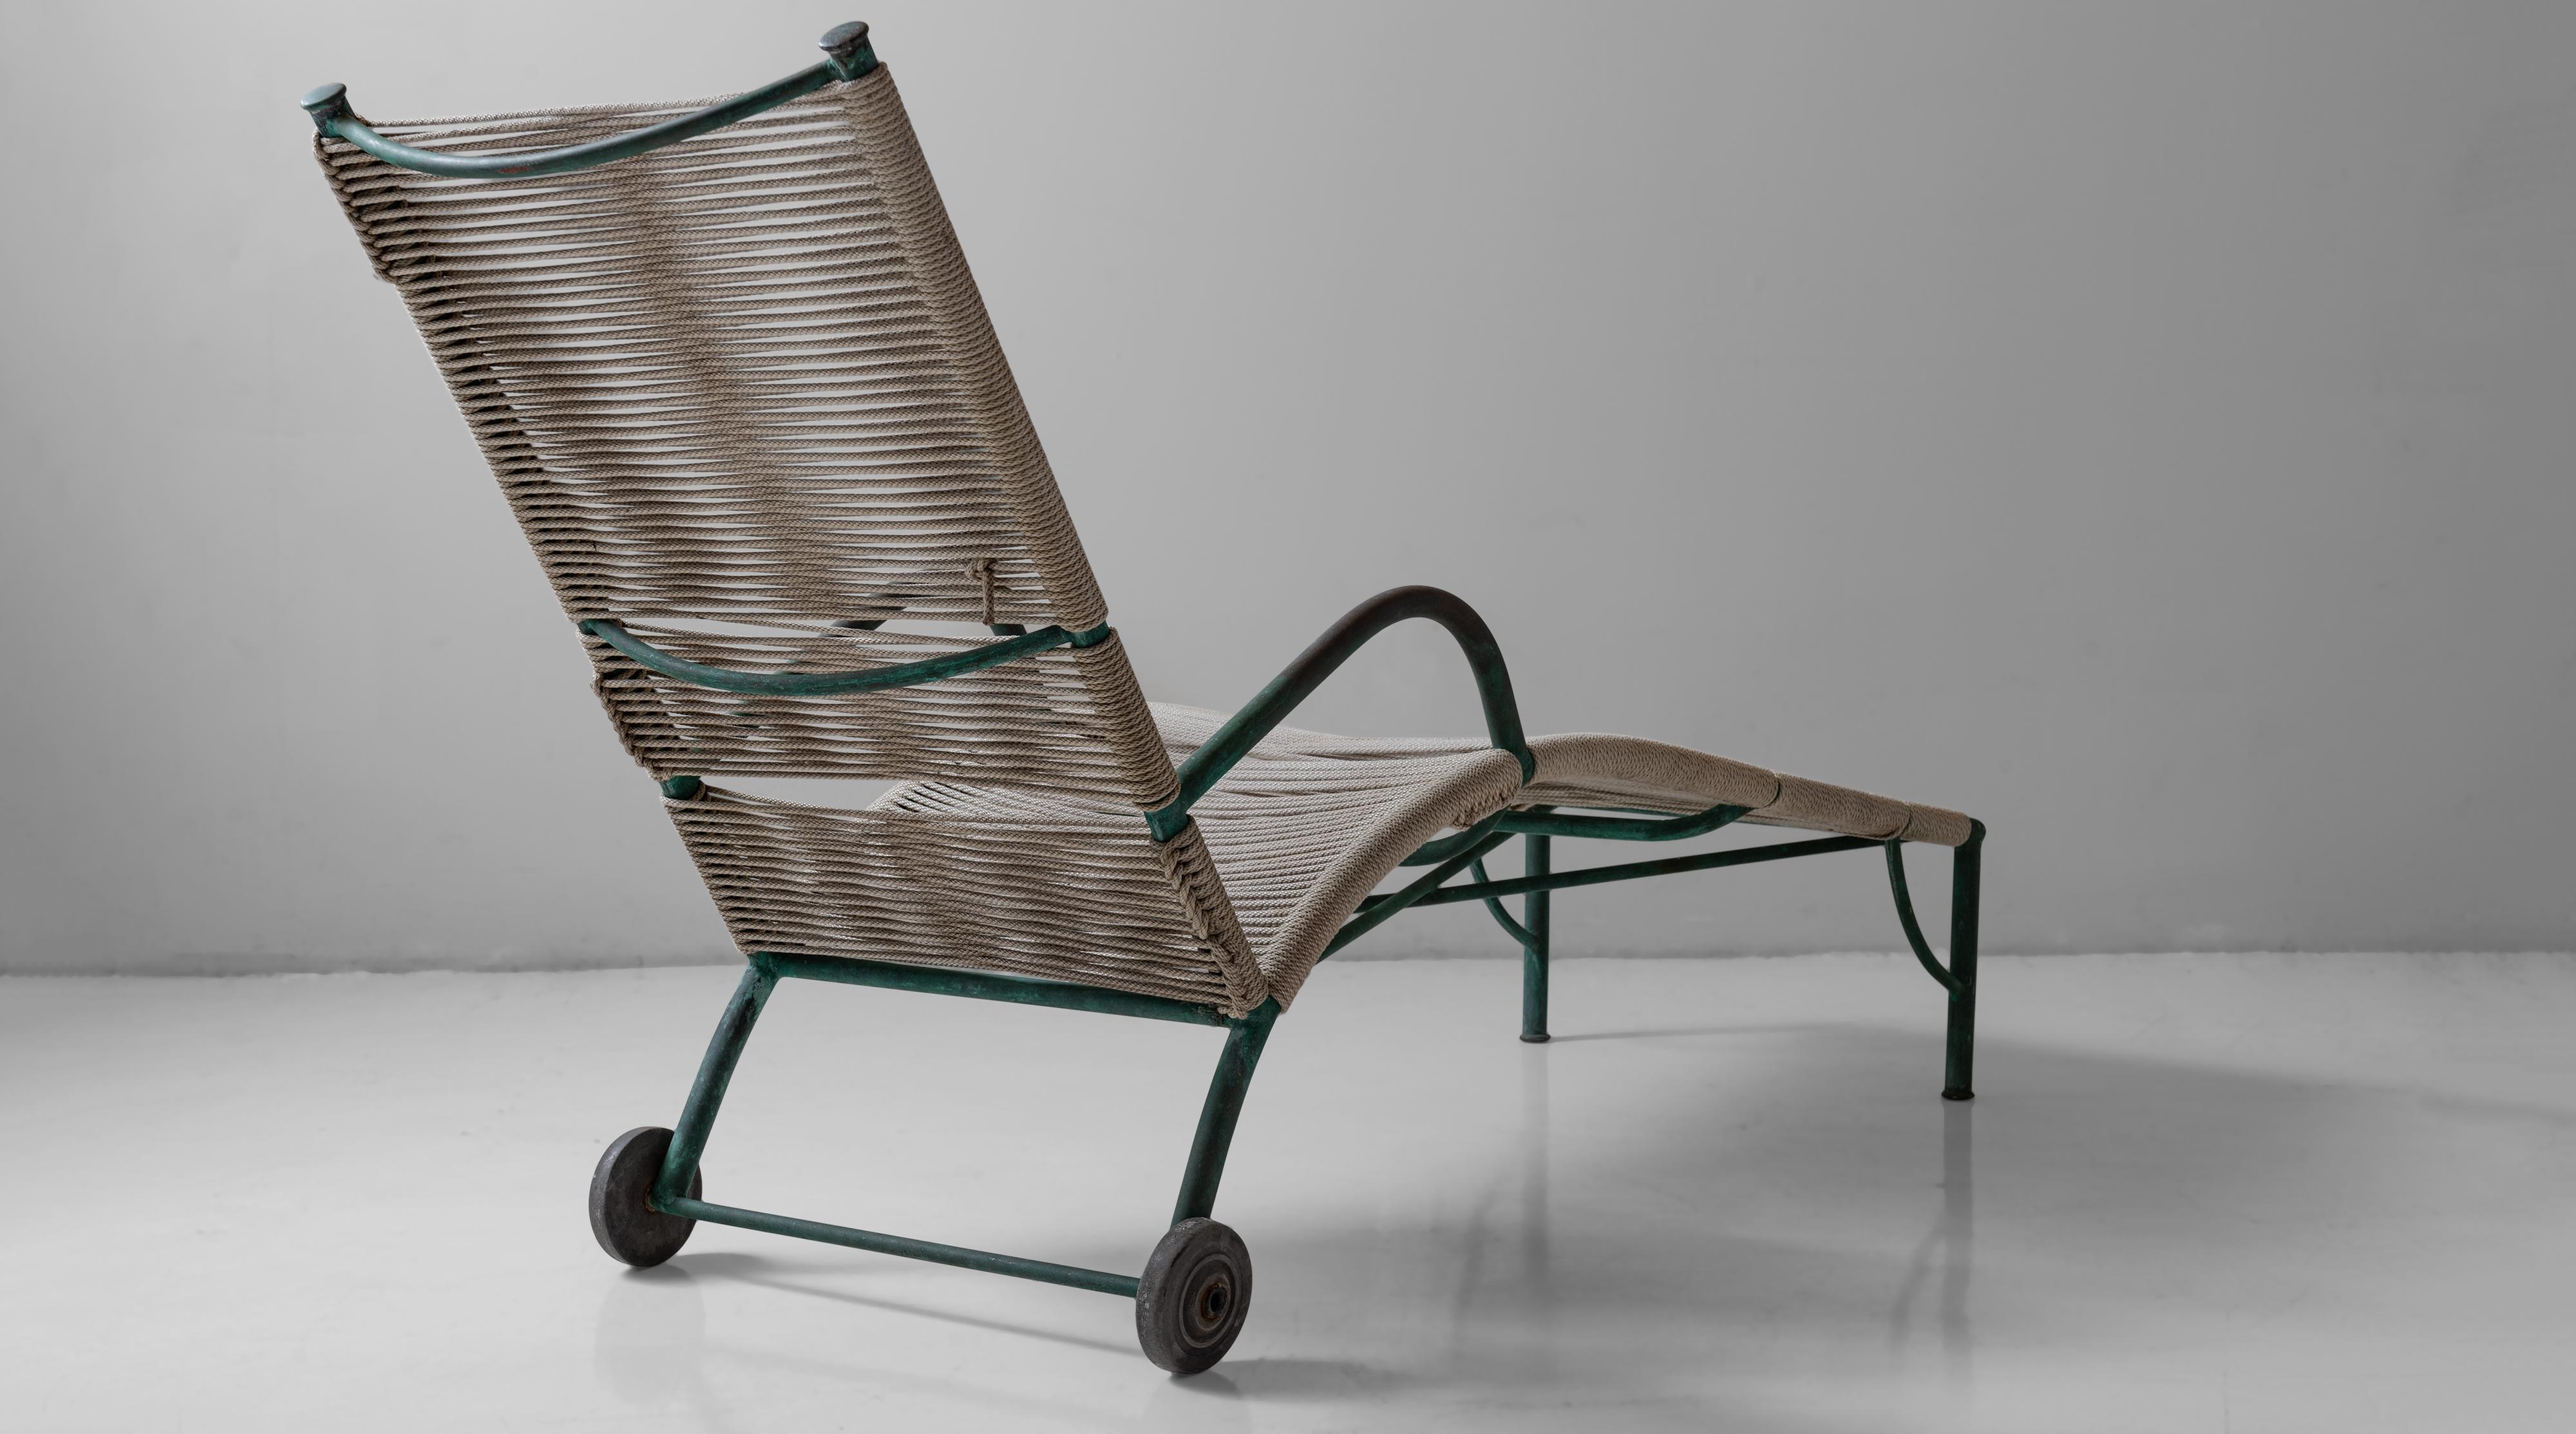 Robert Lewis bronze patio chaise lounge, California circa 1930

Bronze frame with beautiful turquoise patina and woven rope seat and back.

Measures: 22.5”w x 71”d x 41.5”h x armrest 23.5” seat 15.5”.